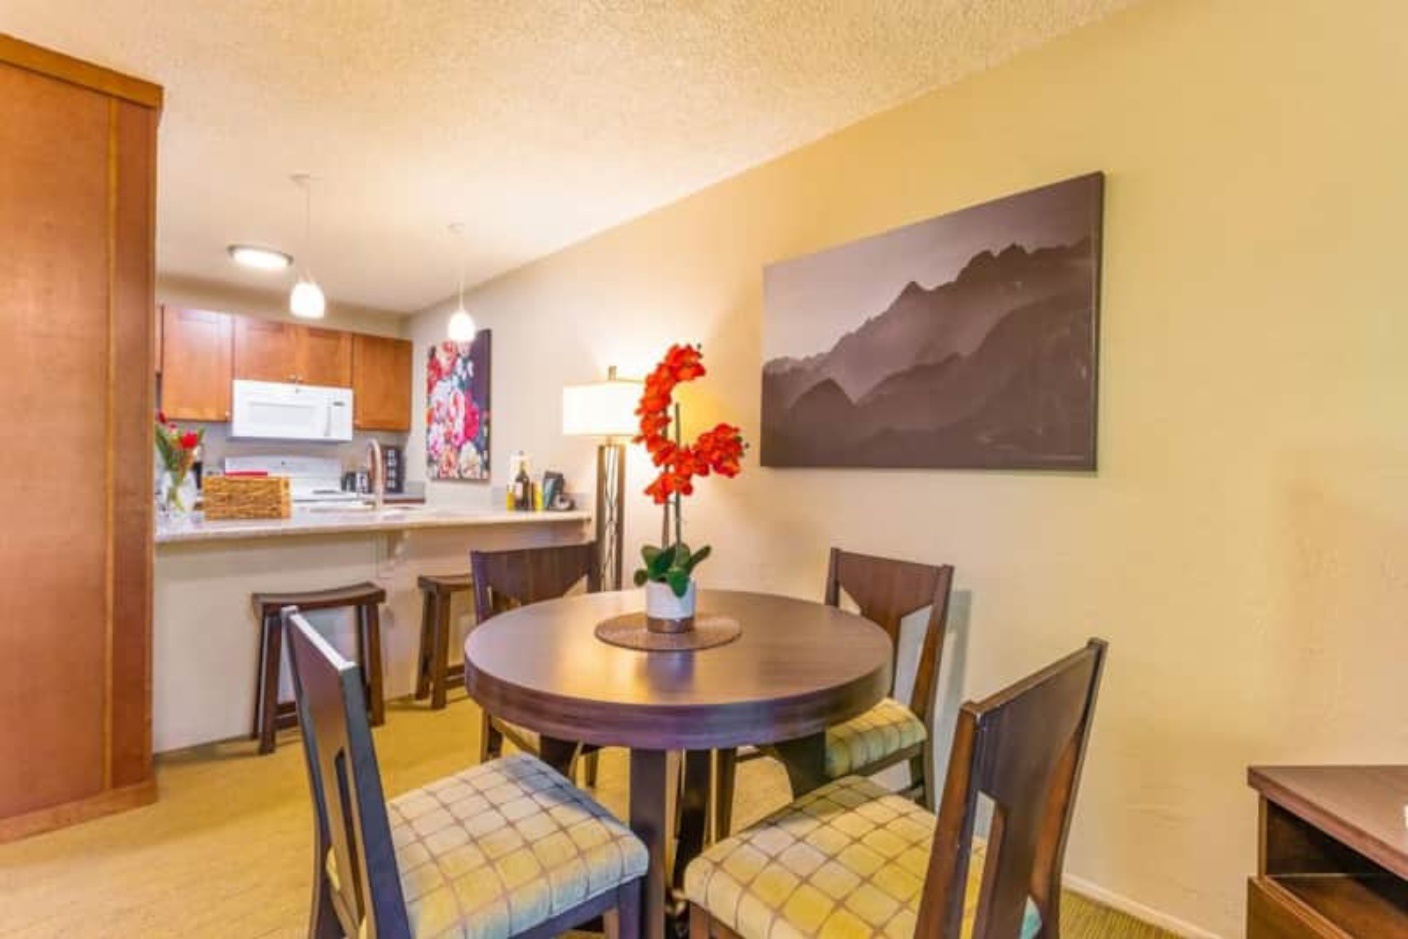 Kapaa Vacation Rentals, Kahaki Hale - The dinette for four is adjacent to the kitchen